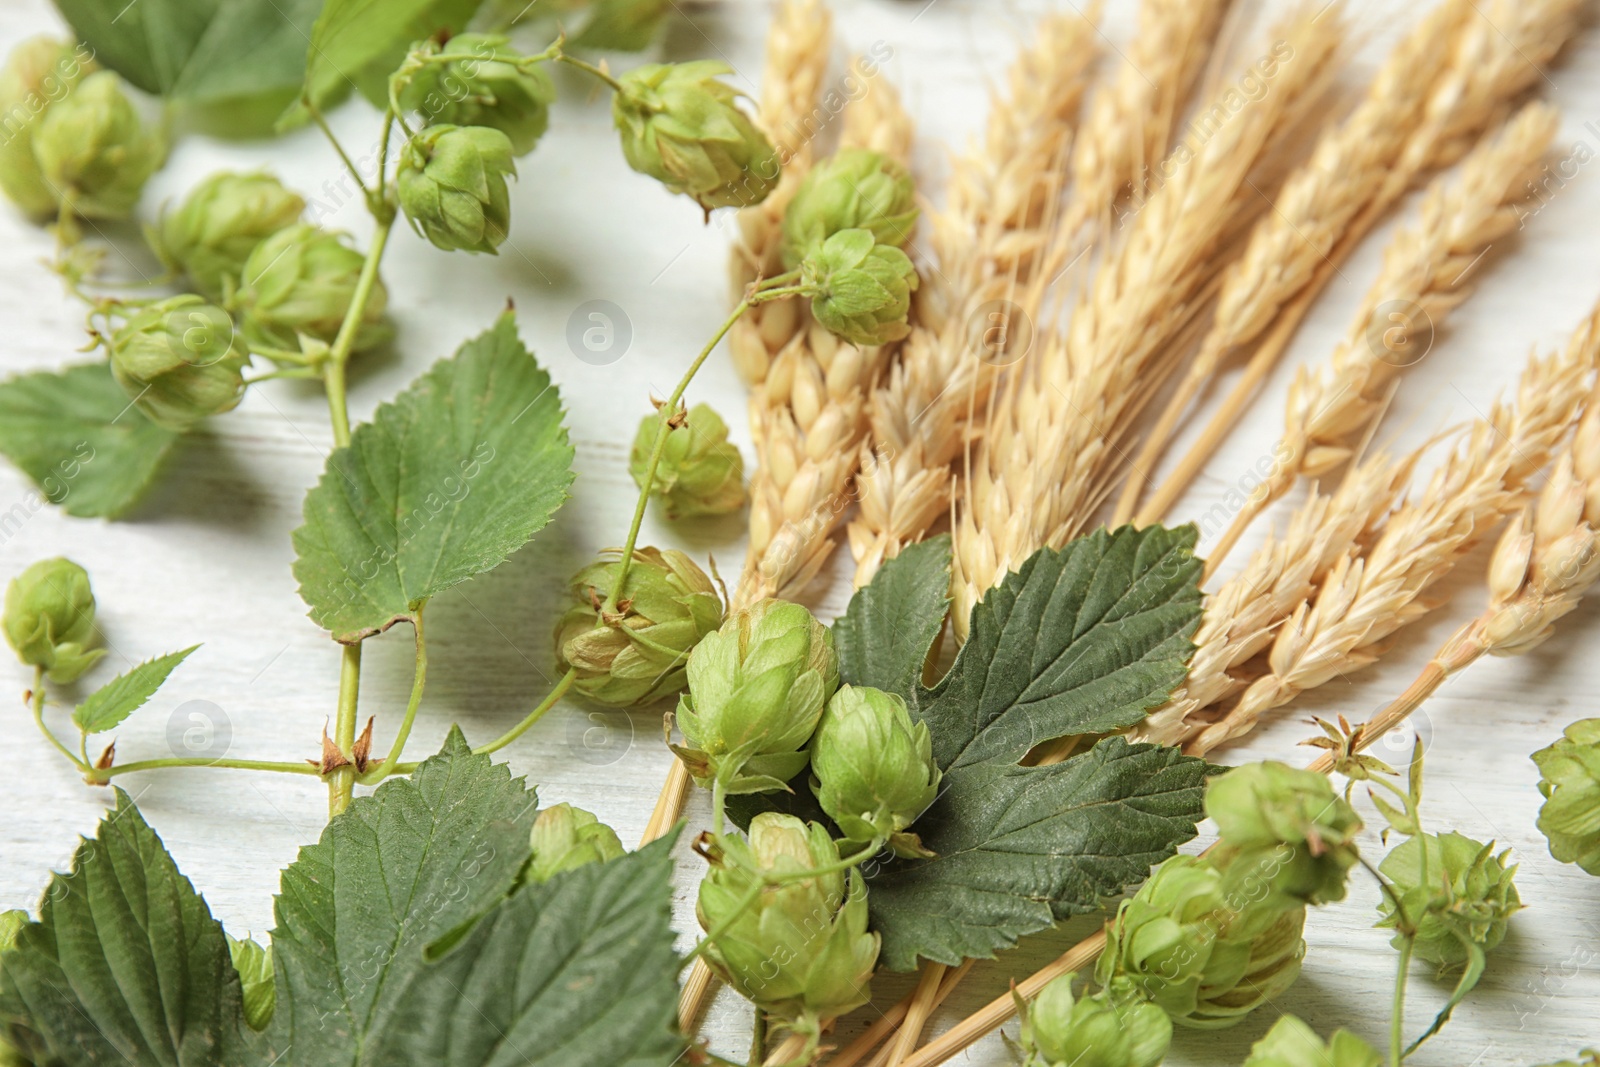 Photo of Fresh green hops and wheat spikes on white wooden background. Beer production